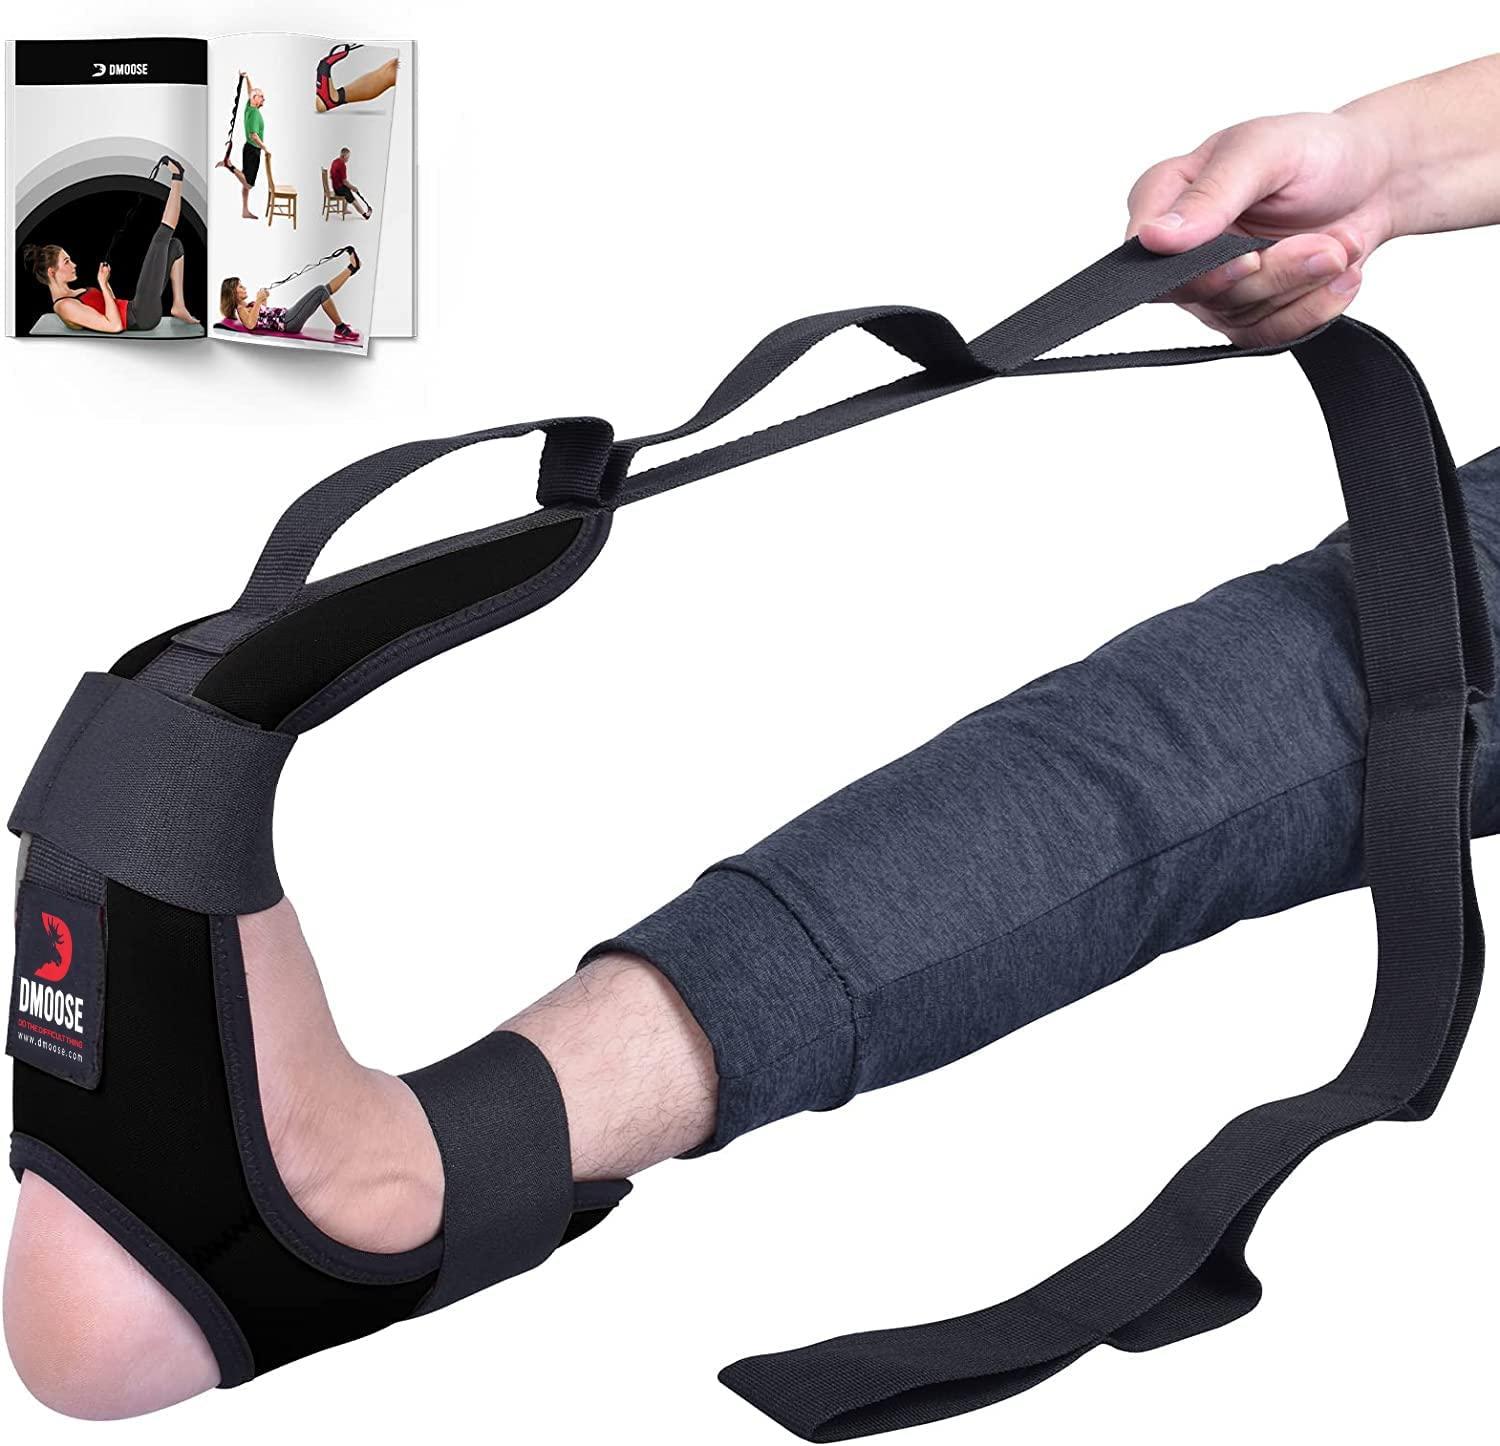 DMoose Calf Stretcher & Foot Stretcher for Plantar Fasciitis - Hamstring Stretcher  Stretching Strap for Achilles Tendonitis, Leg Stretcher Ligament Stretching  Belt for Pain Relief, Dancers and Yoga Black